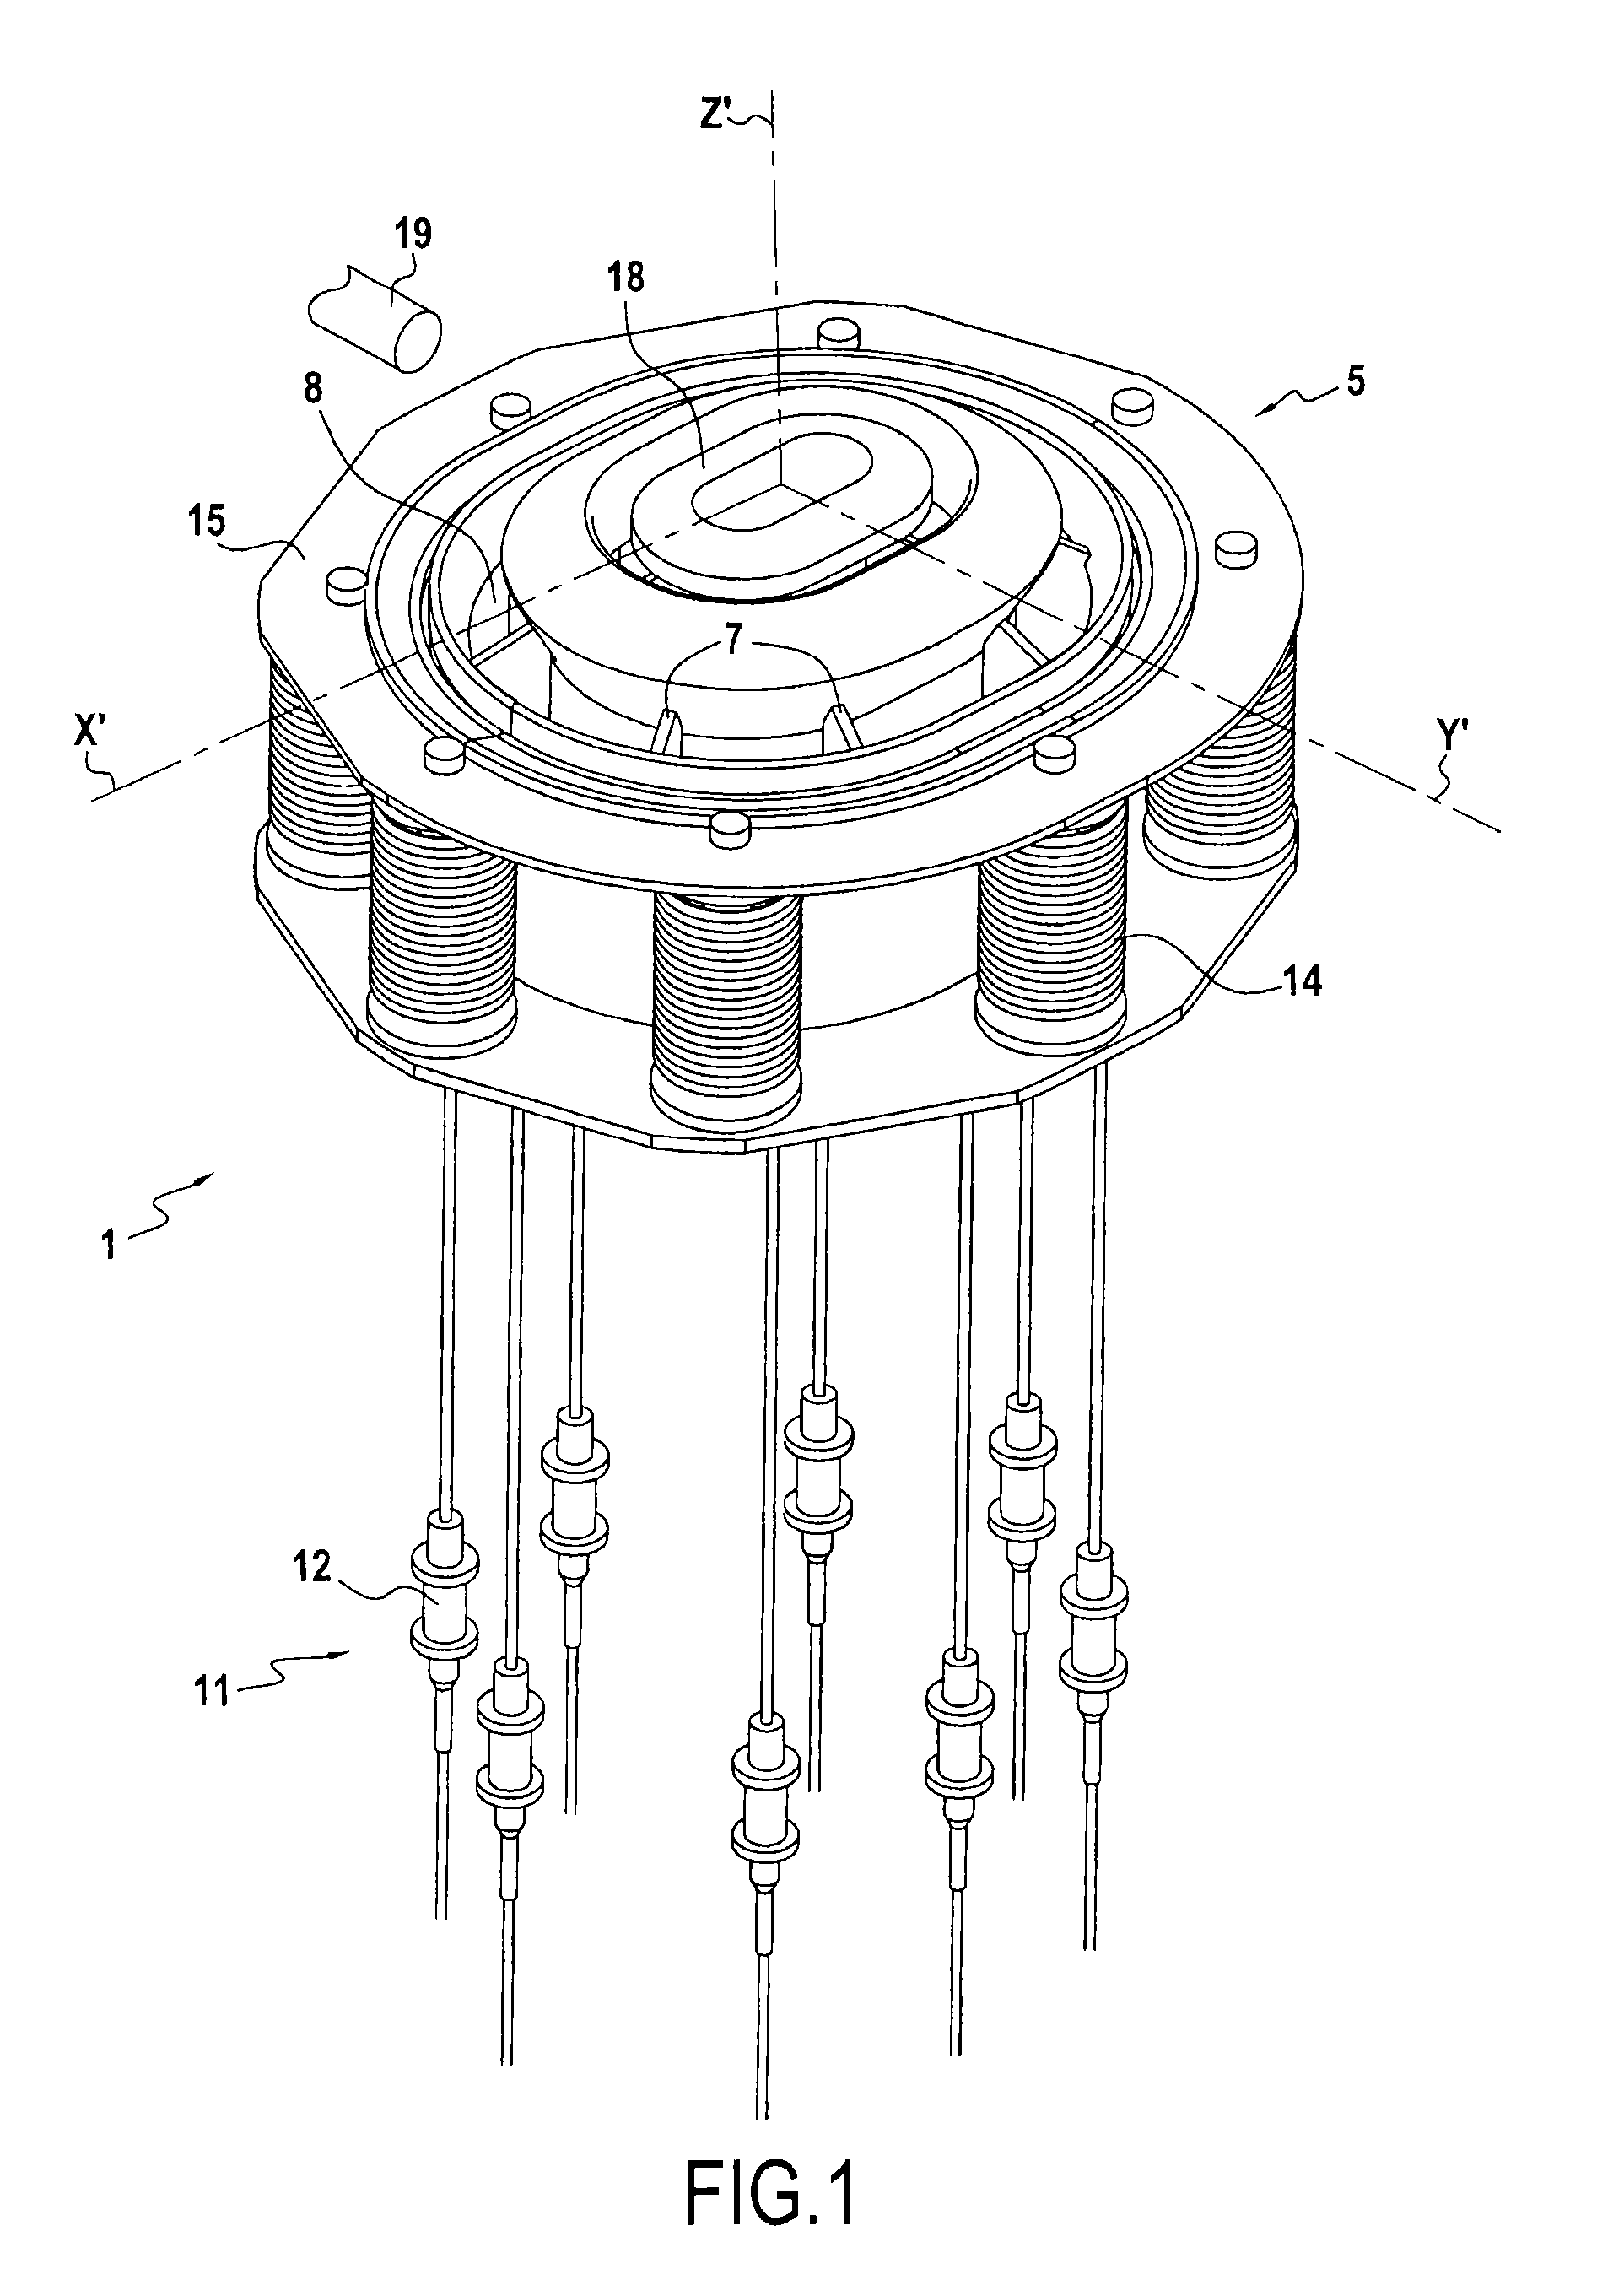 Steerable hall effect thruster having plural independently controllable propellant injectors and a frustoconical exhaust outlet